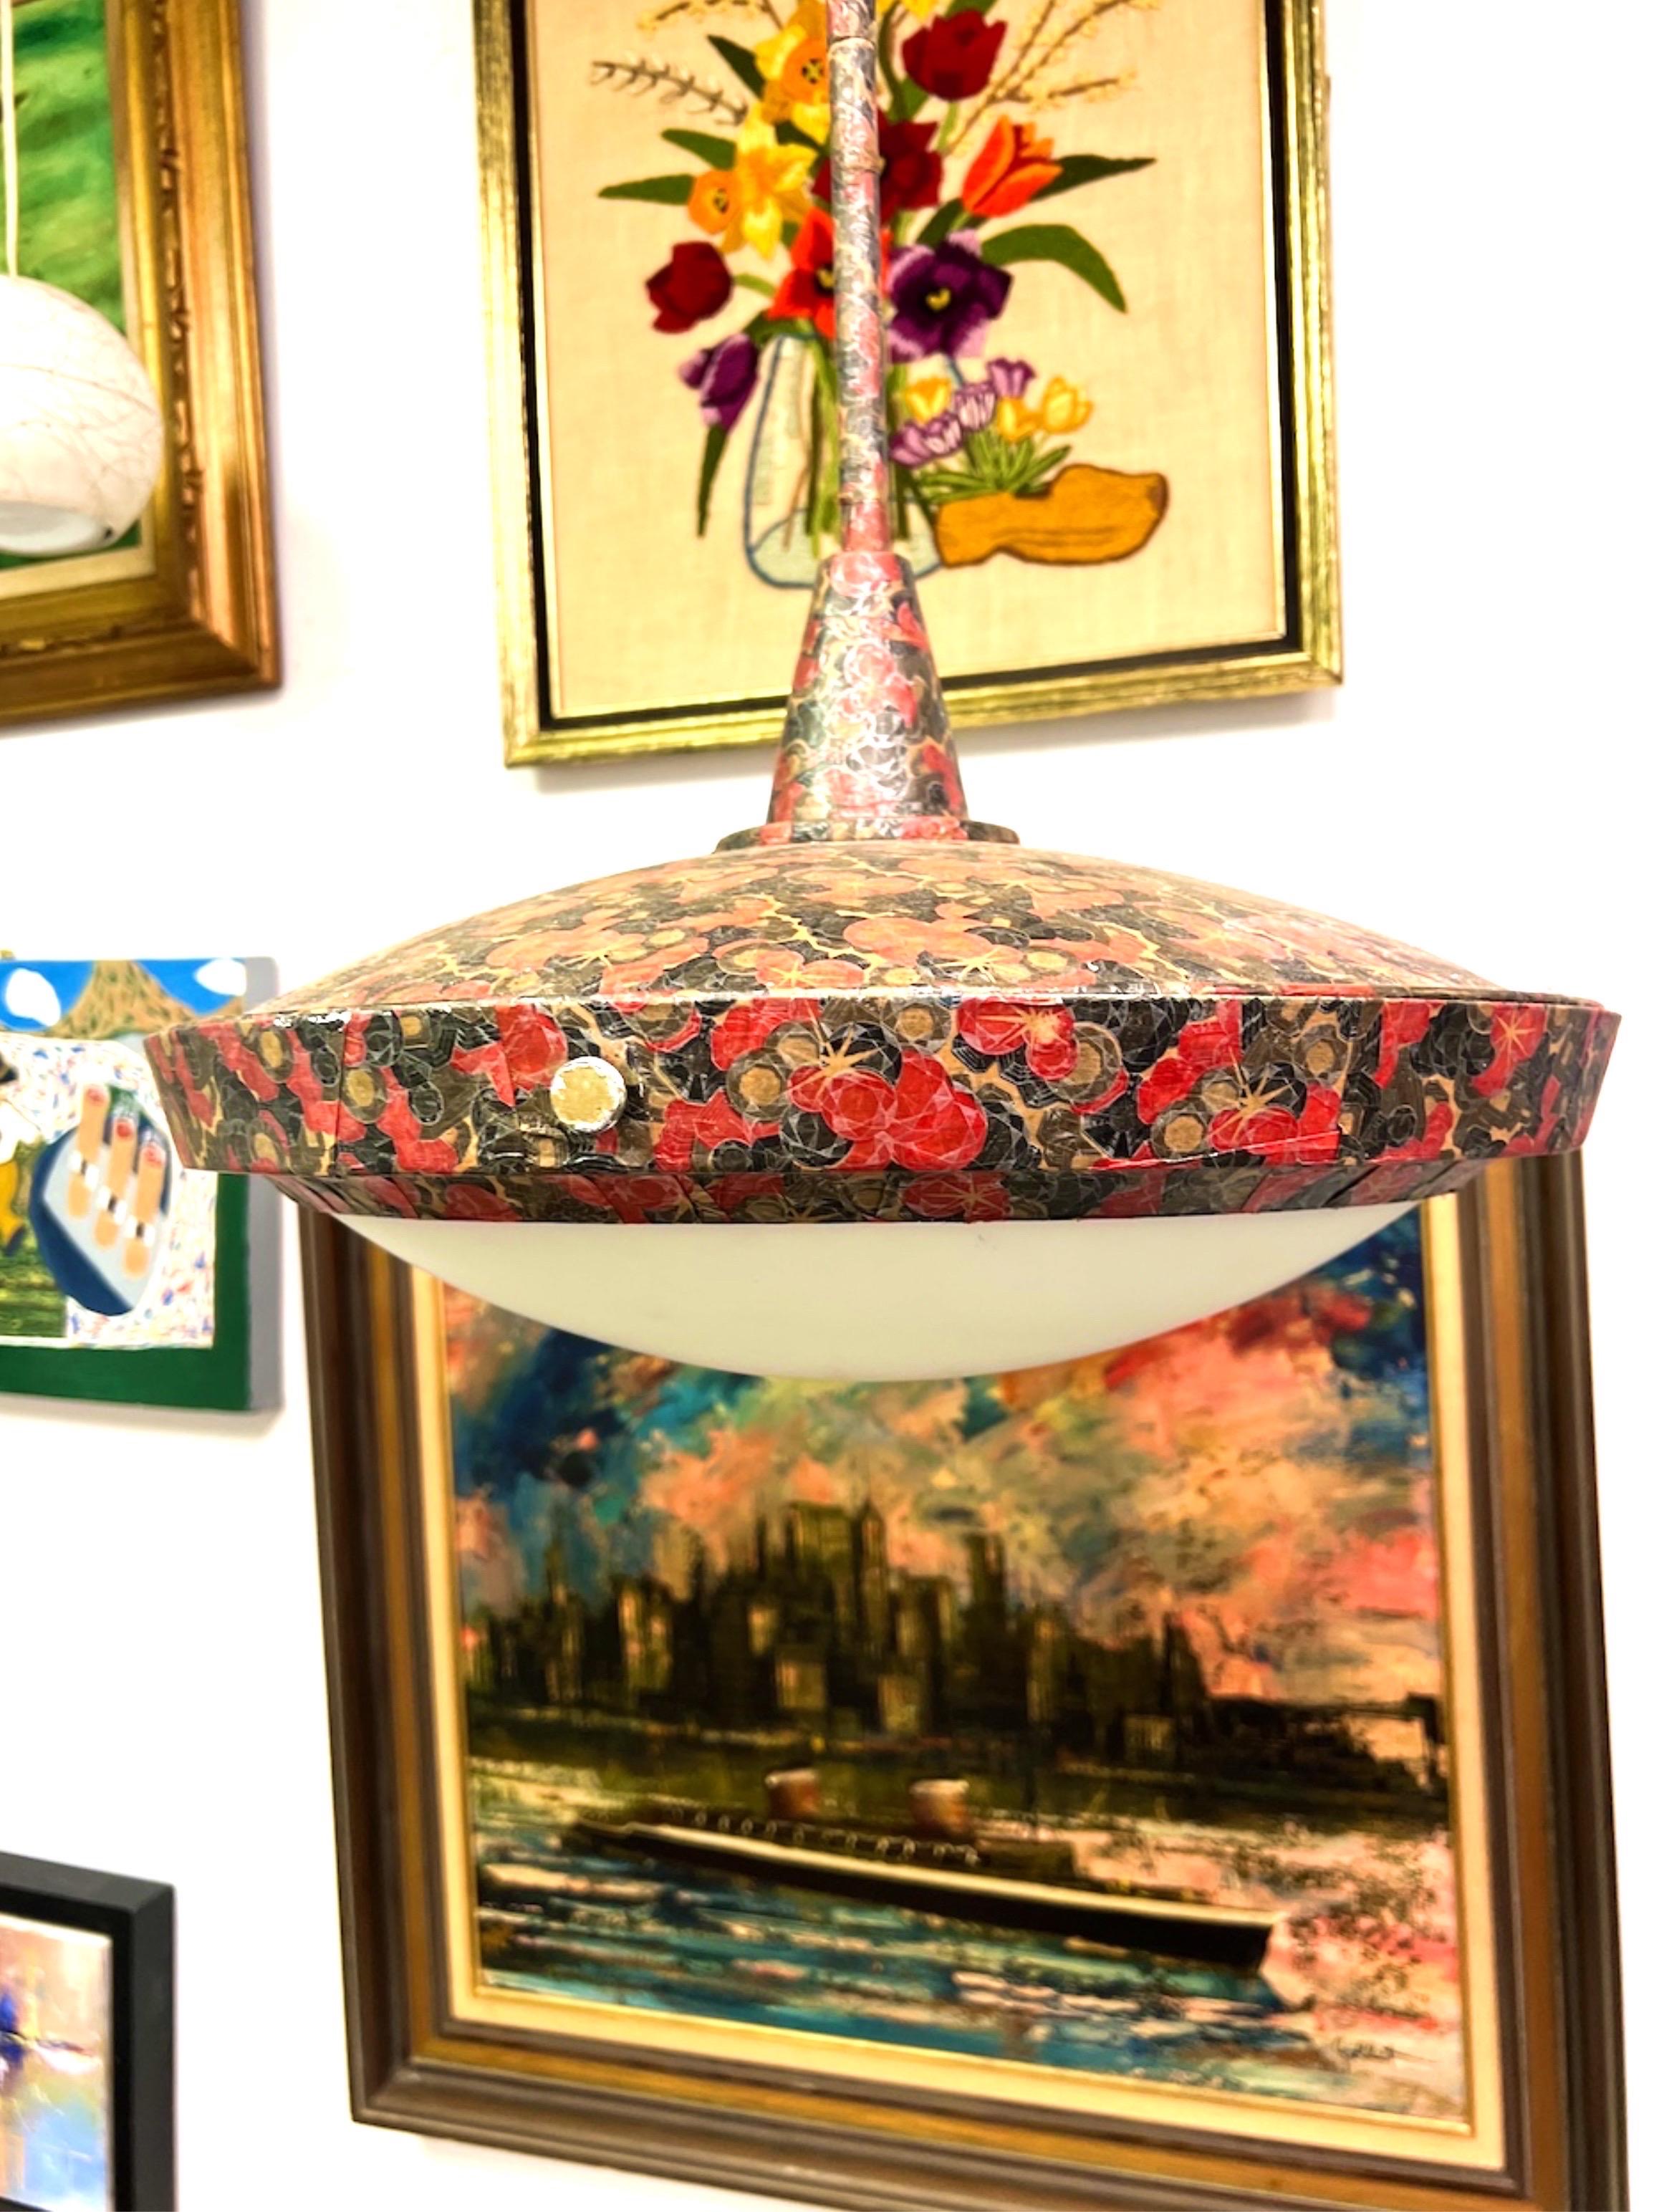 This fabulous mid-century saucer large pendant light has been decoupaged in a red floral Japanese rice paper. Brass fittings on the sides hold the large satin glass in place. Measurements are from the bottom of the glass to the top of the canopy.